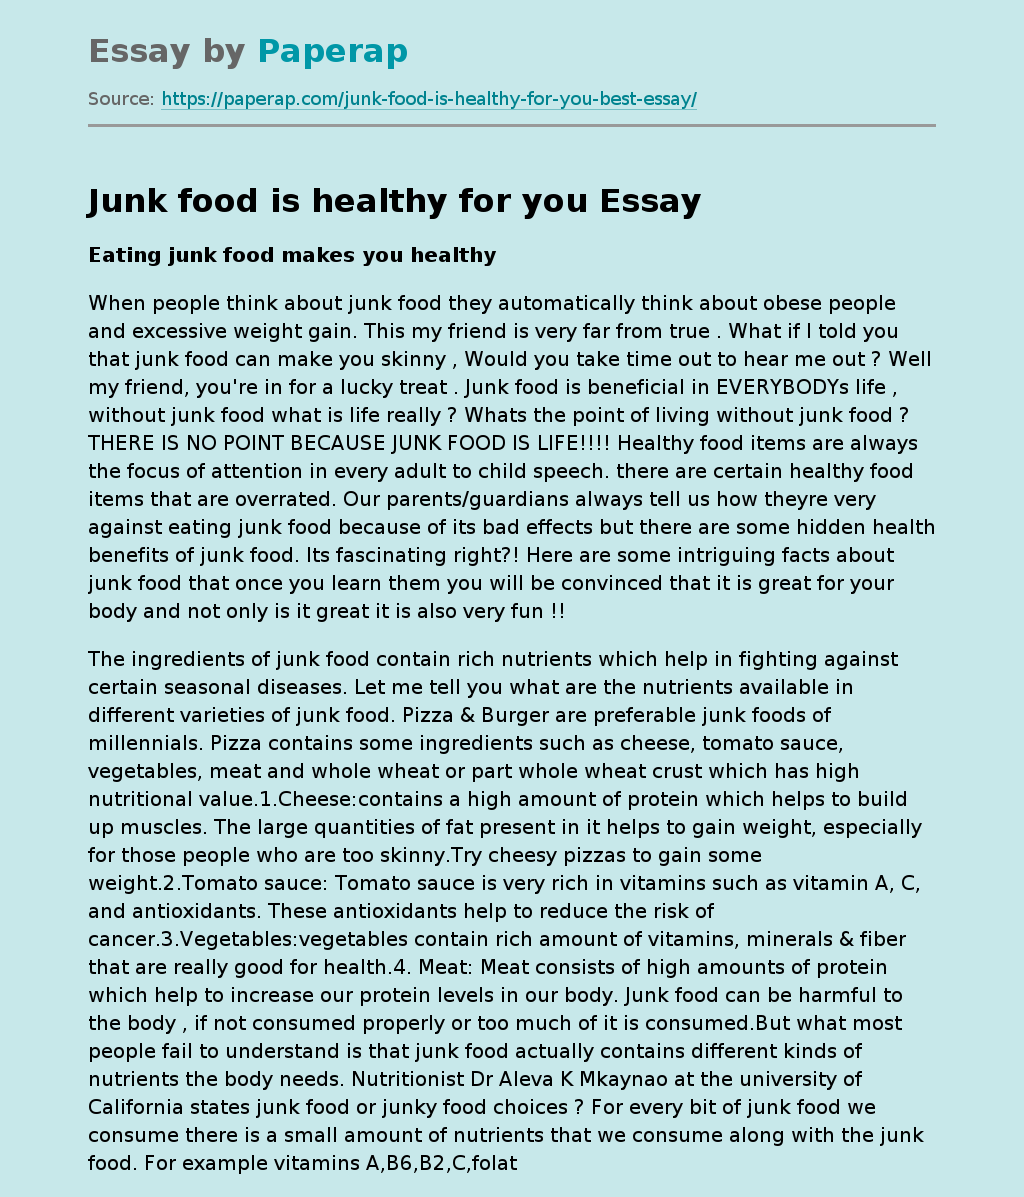 Junk food is healthy for you